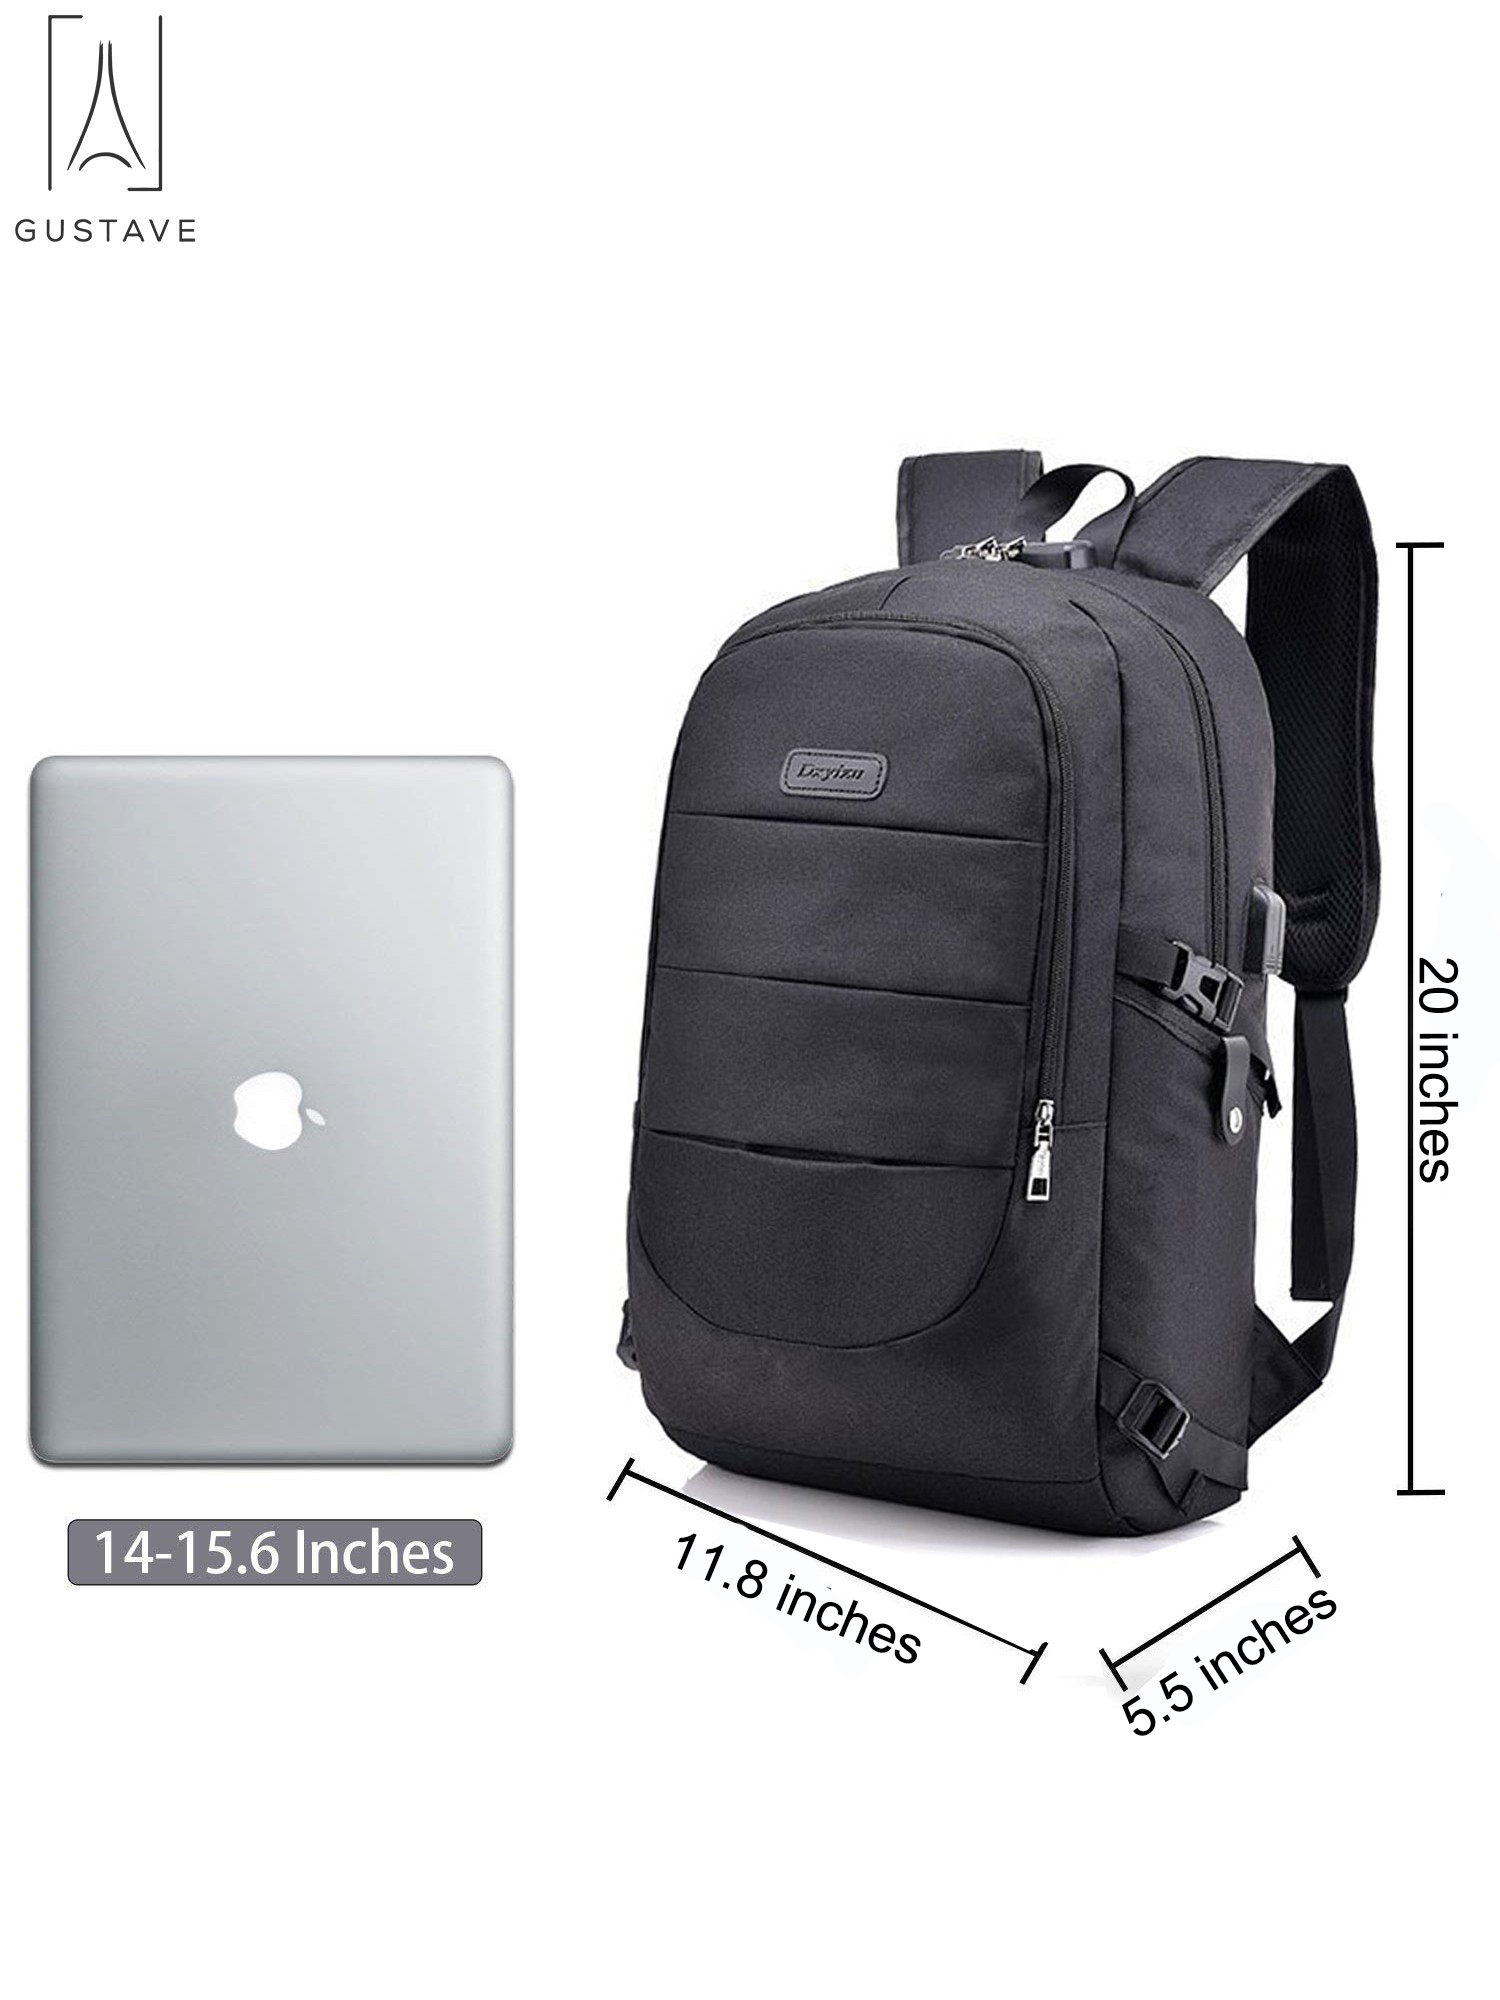 Gustave Laptop Backpack Water Resistant Anti-Theft College Backpack with USB Charging Port and Lock 17Inch Compurter Backpacks for Women Men, Casual Hiking Travel Daypack "Black" - image 3 of 9